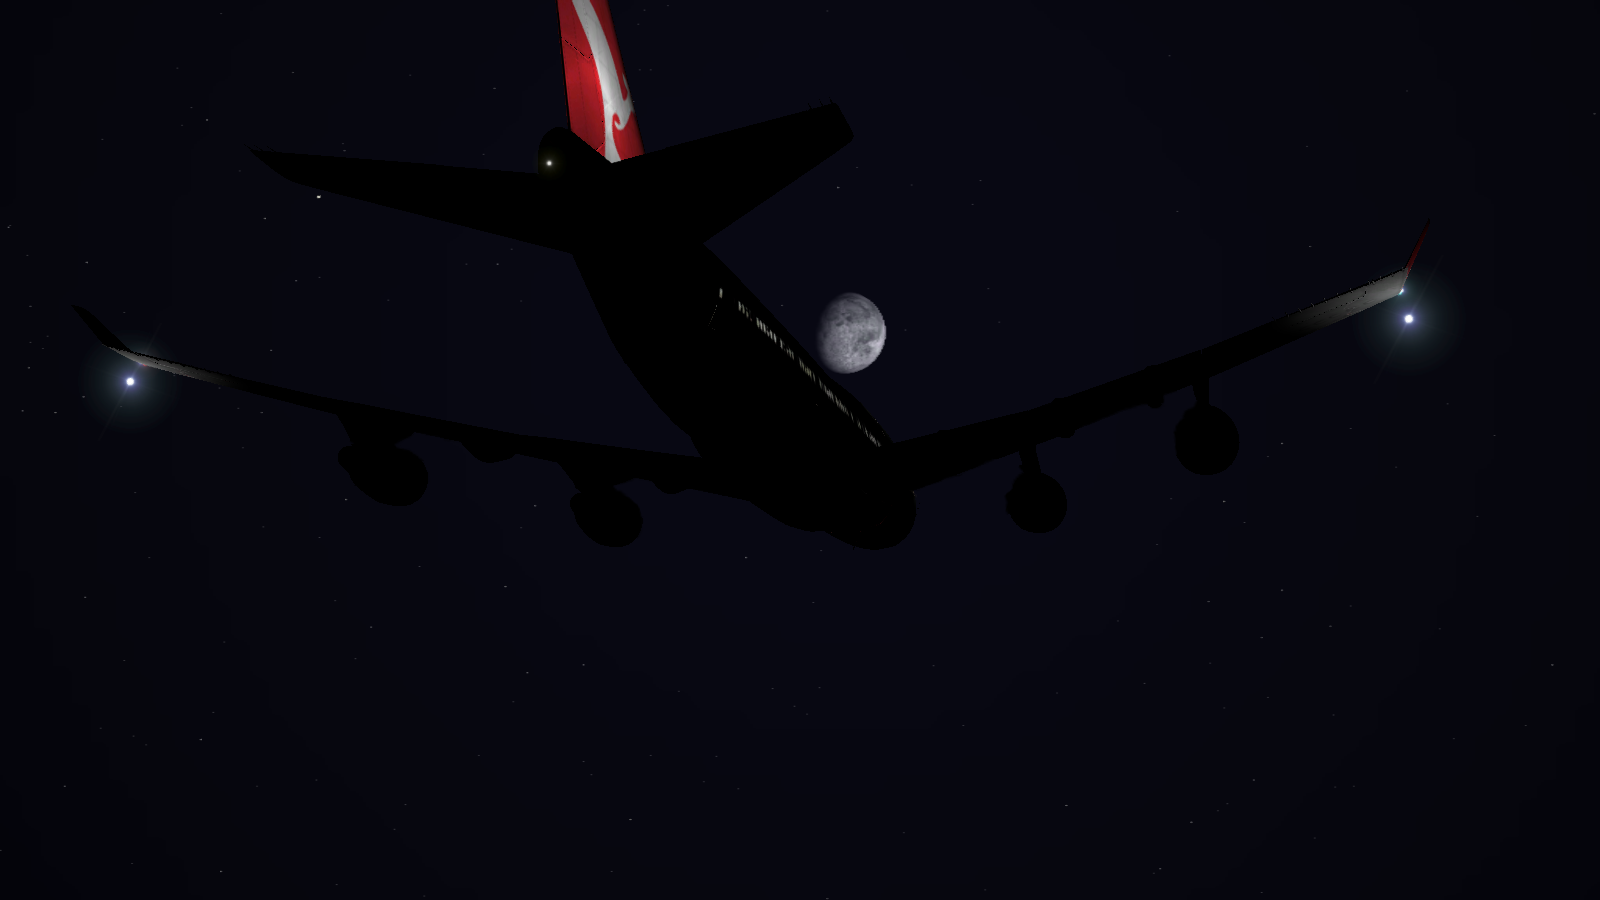 QF 747-400 under the moon